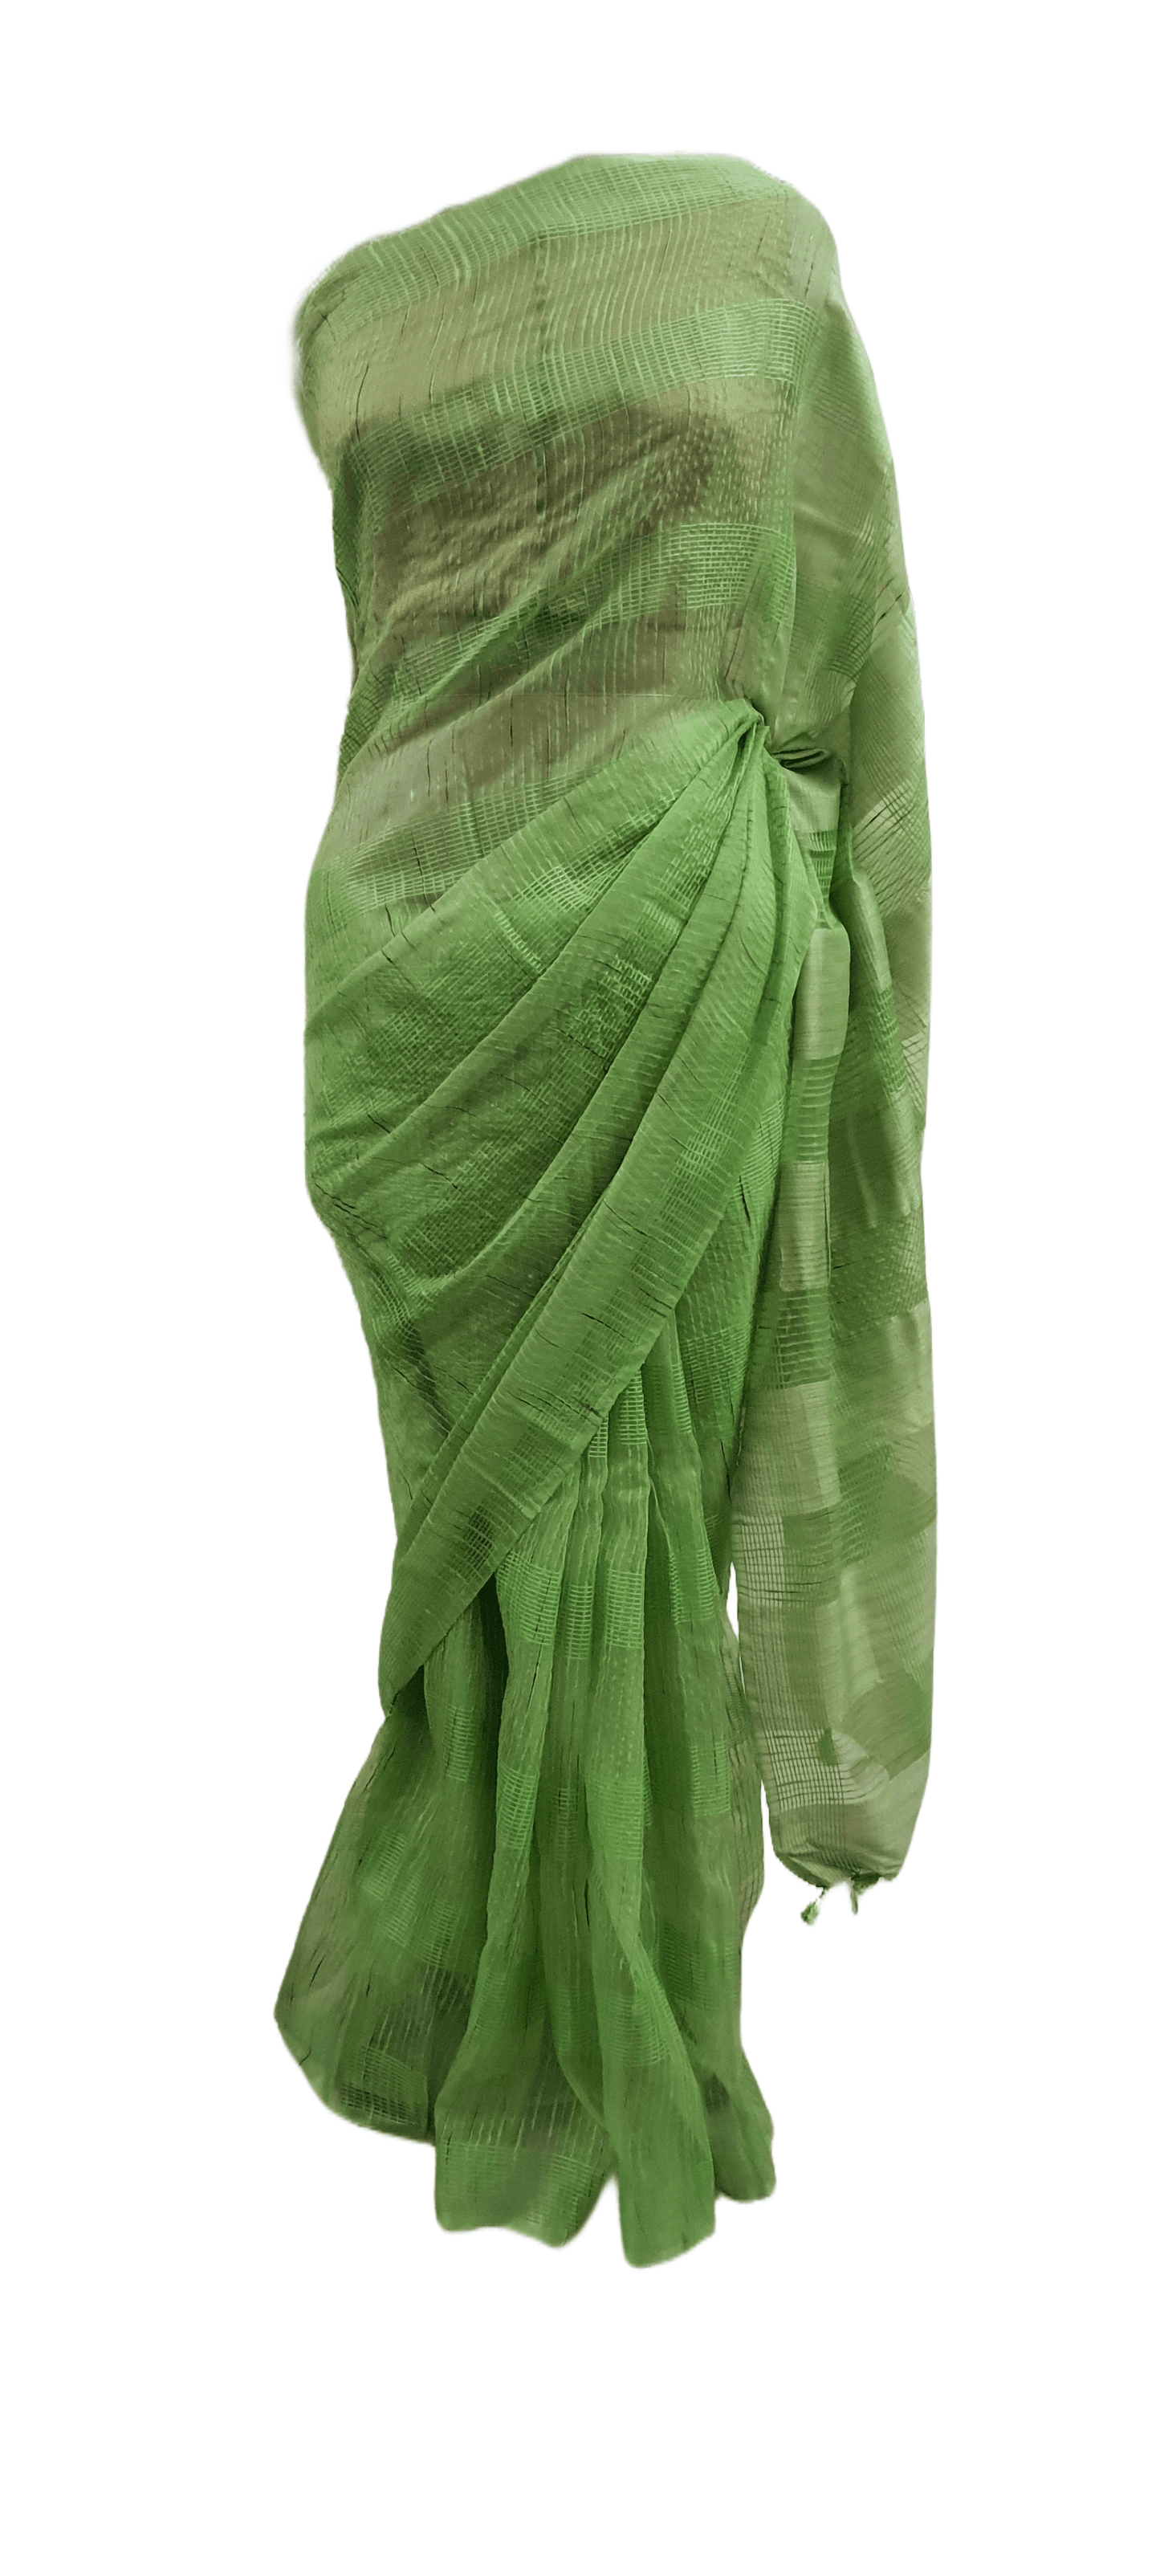 Green Katan Ghicha Saree with Pure Ikkat Cotton Blouse KG07 - Ethnic's By Anvi Creations